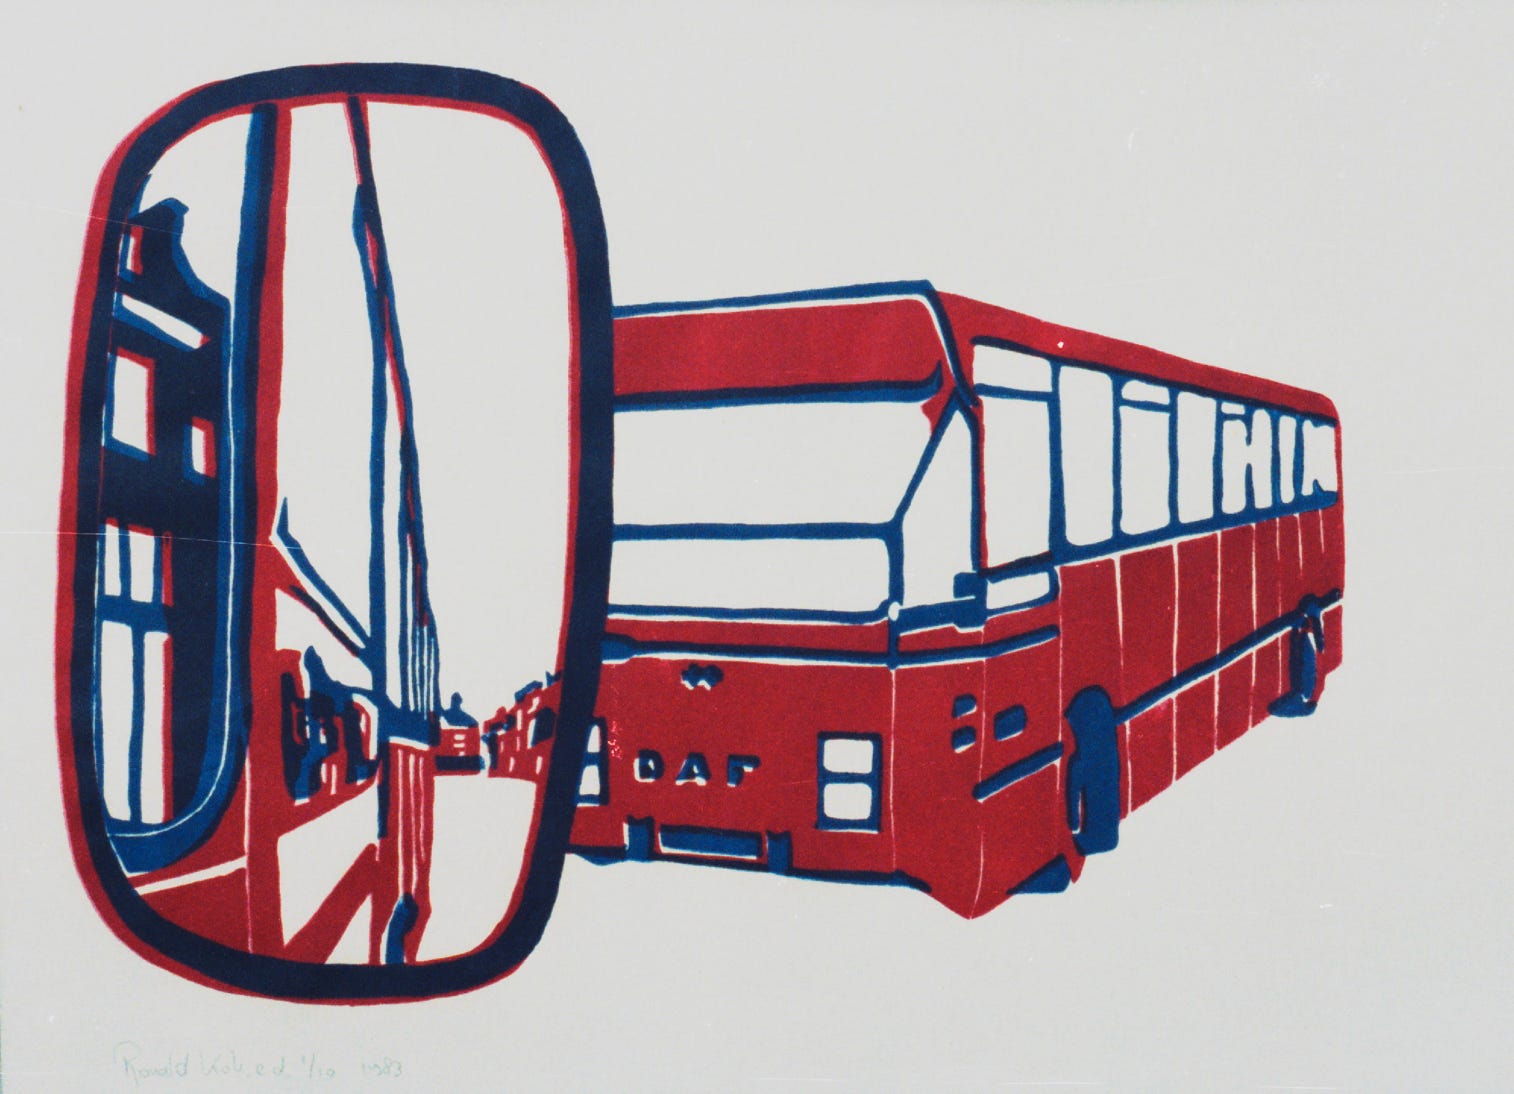 Linoleum print of a bus in the Hague in two colors